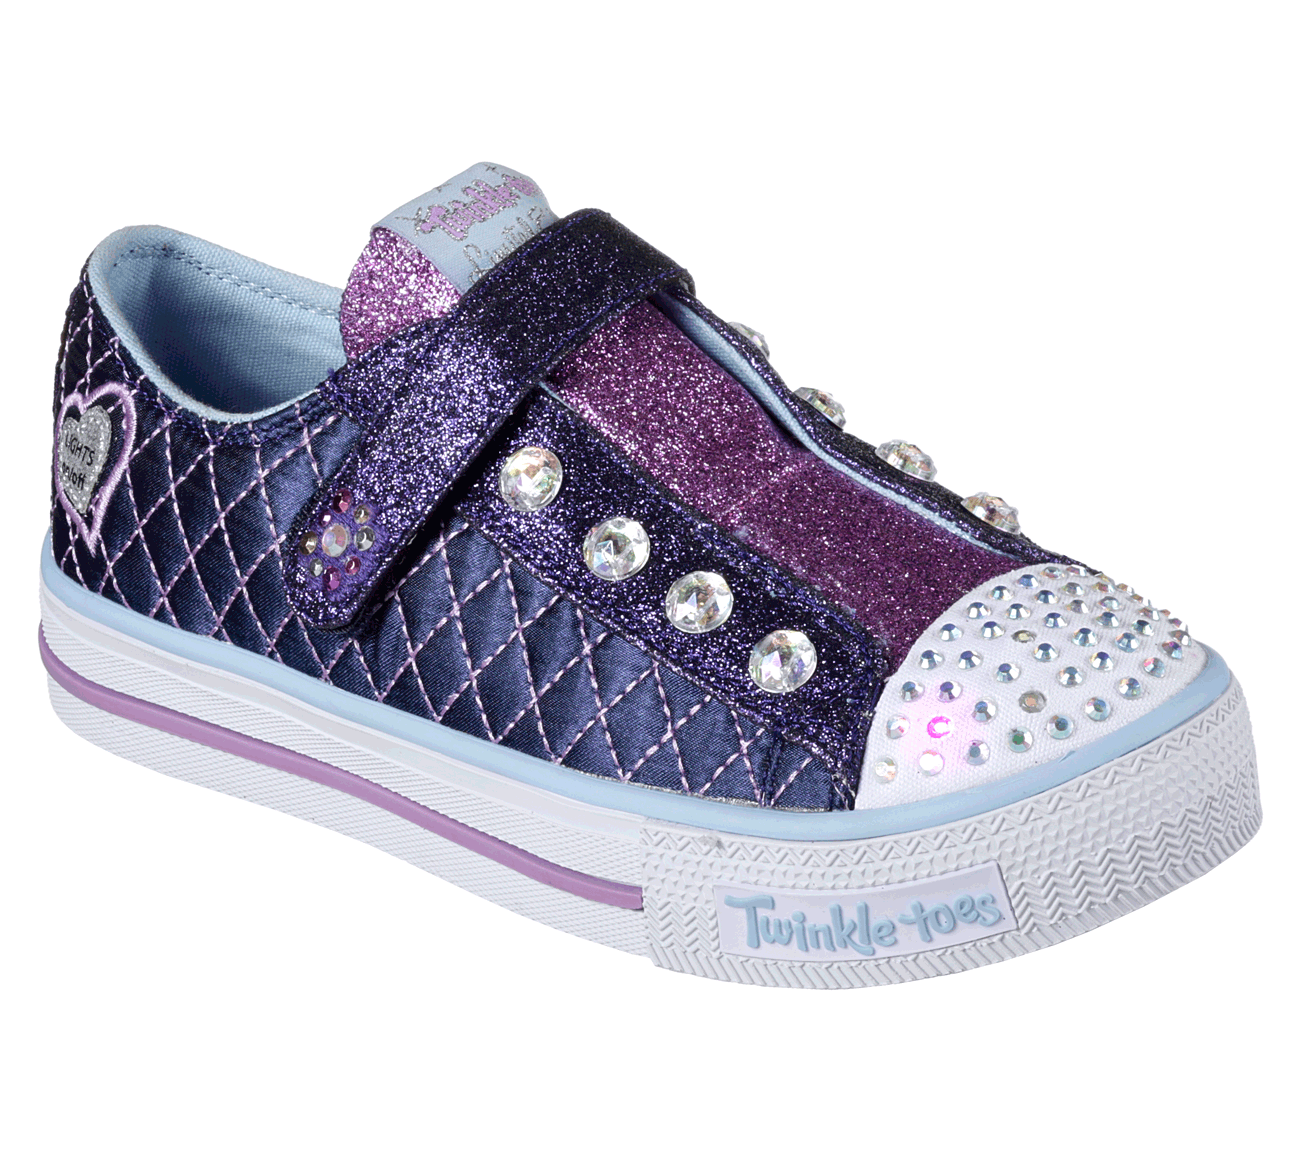 Twinkle Toes: Shuffles - Sparkly Jewels 